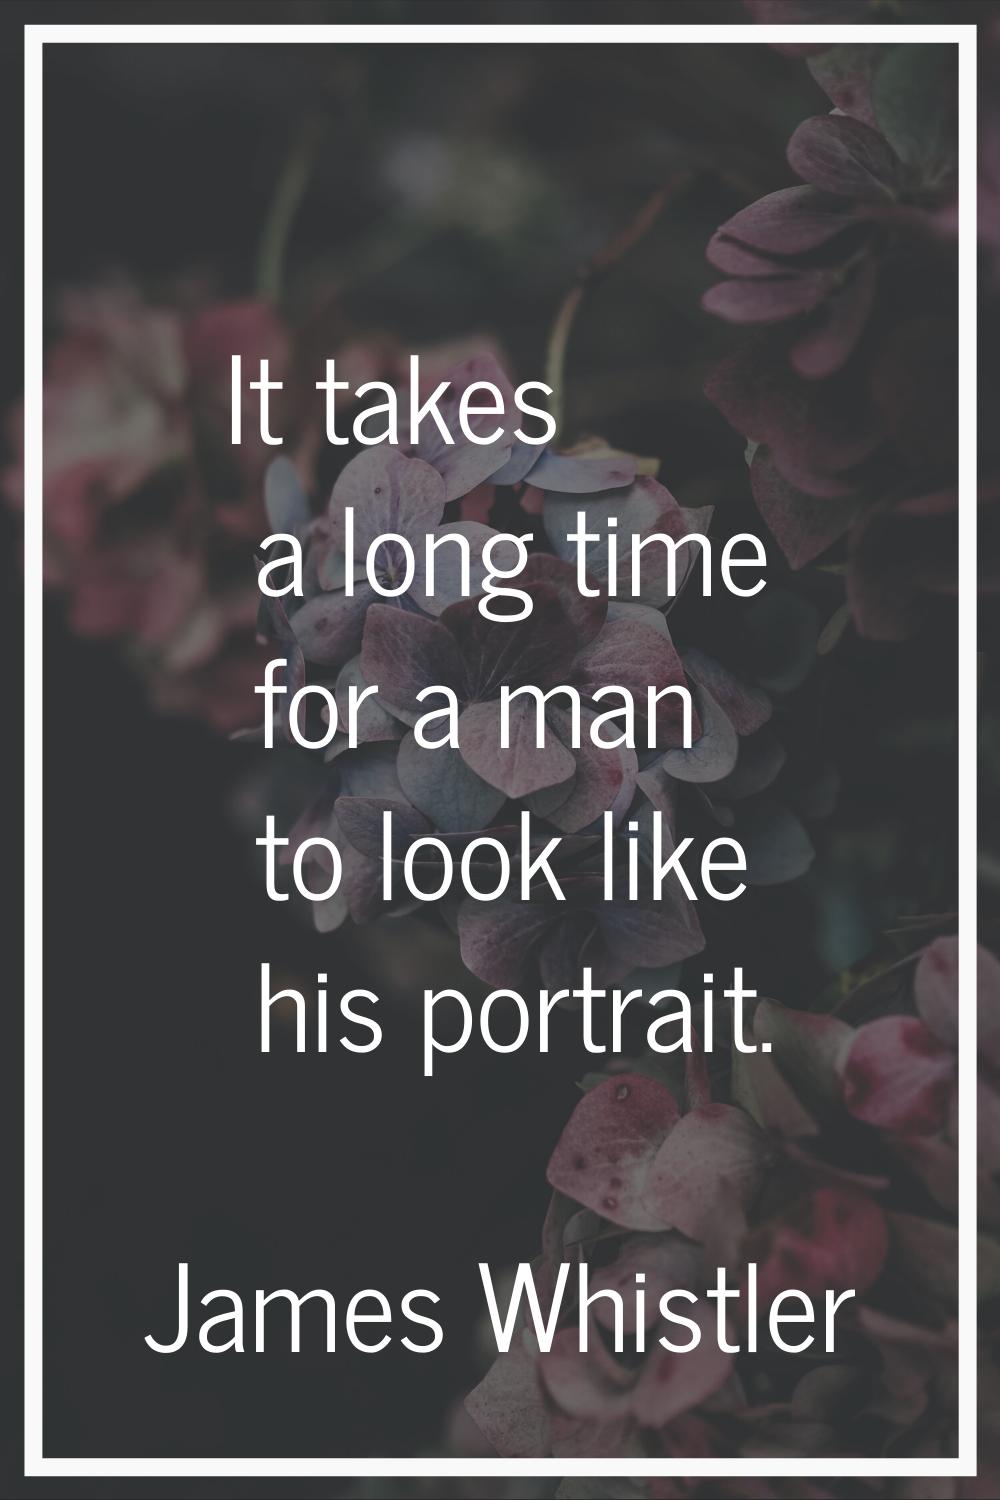 It takes a long time for a man to look like his portrait.